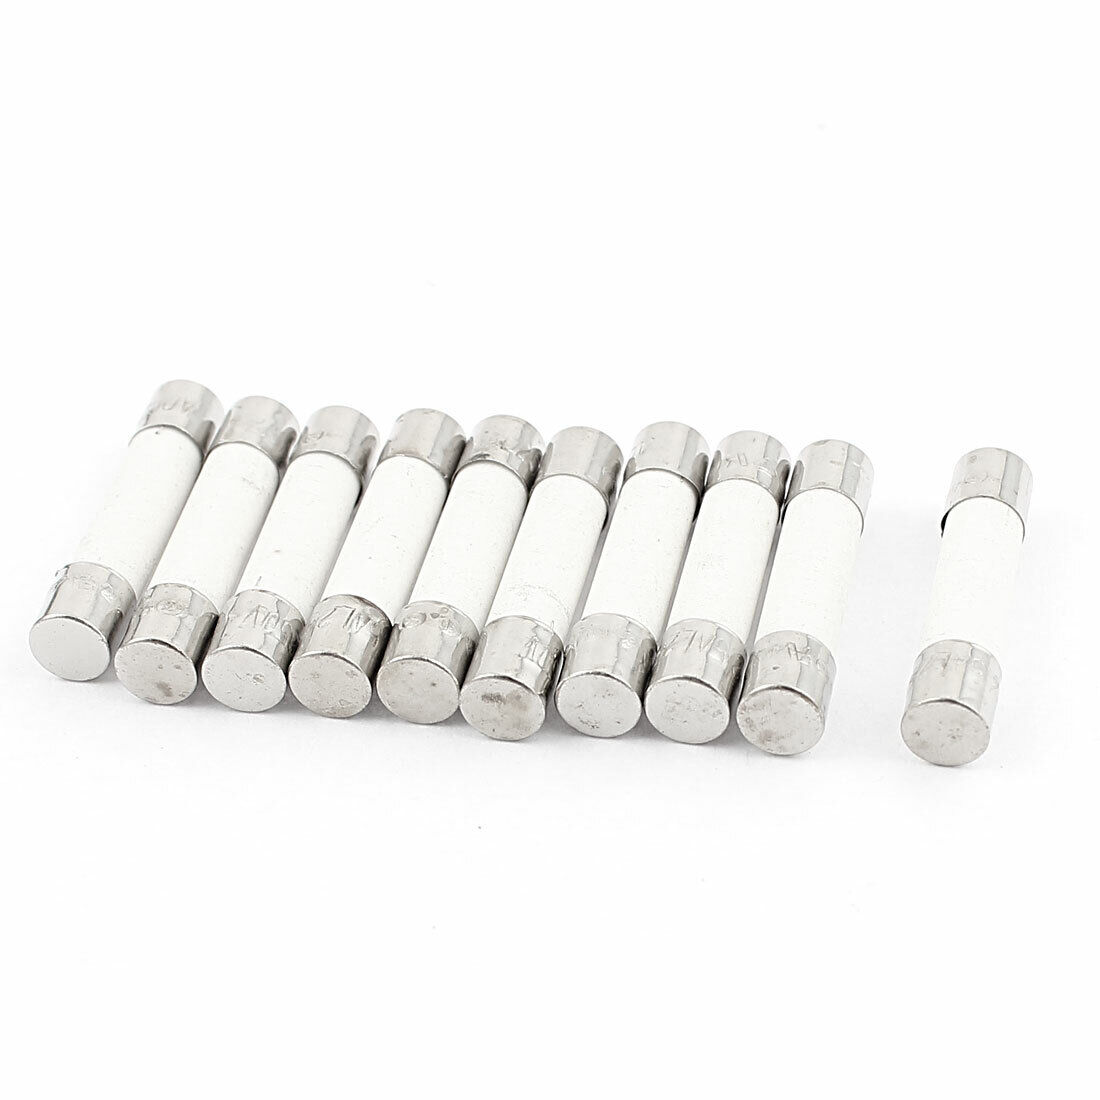 uxcell Fusible Cylinder Cap Ceramic Tube Fuse Links 5 x 25mm 250V